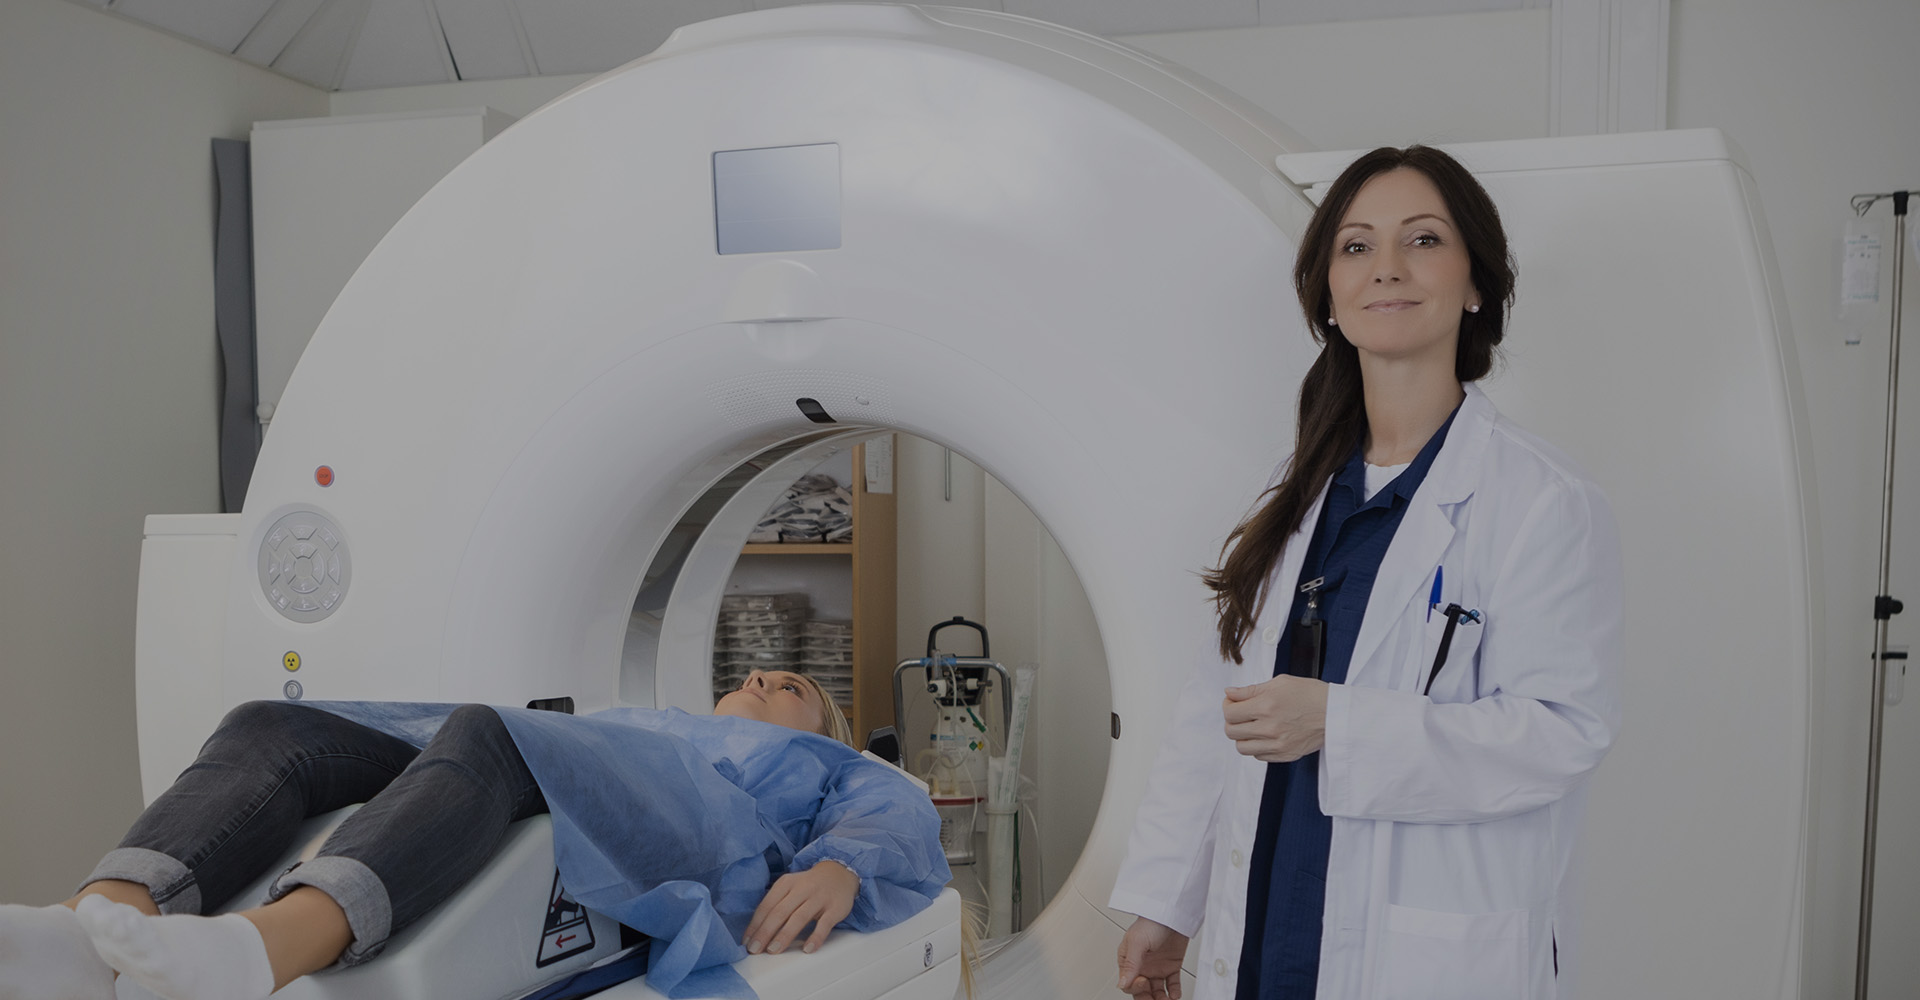 MRI doctor standing next to machine and patient